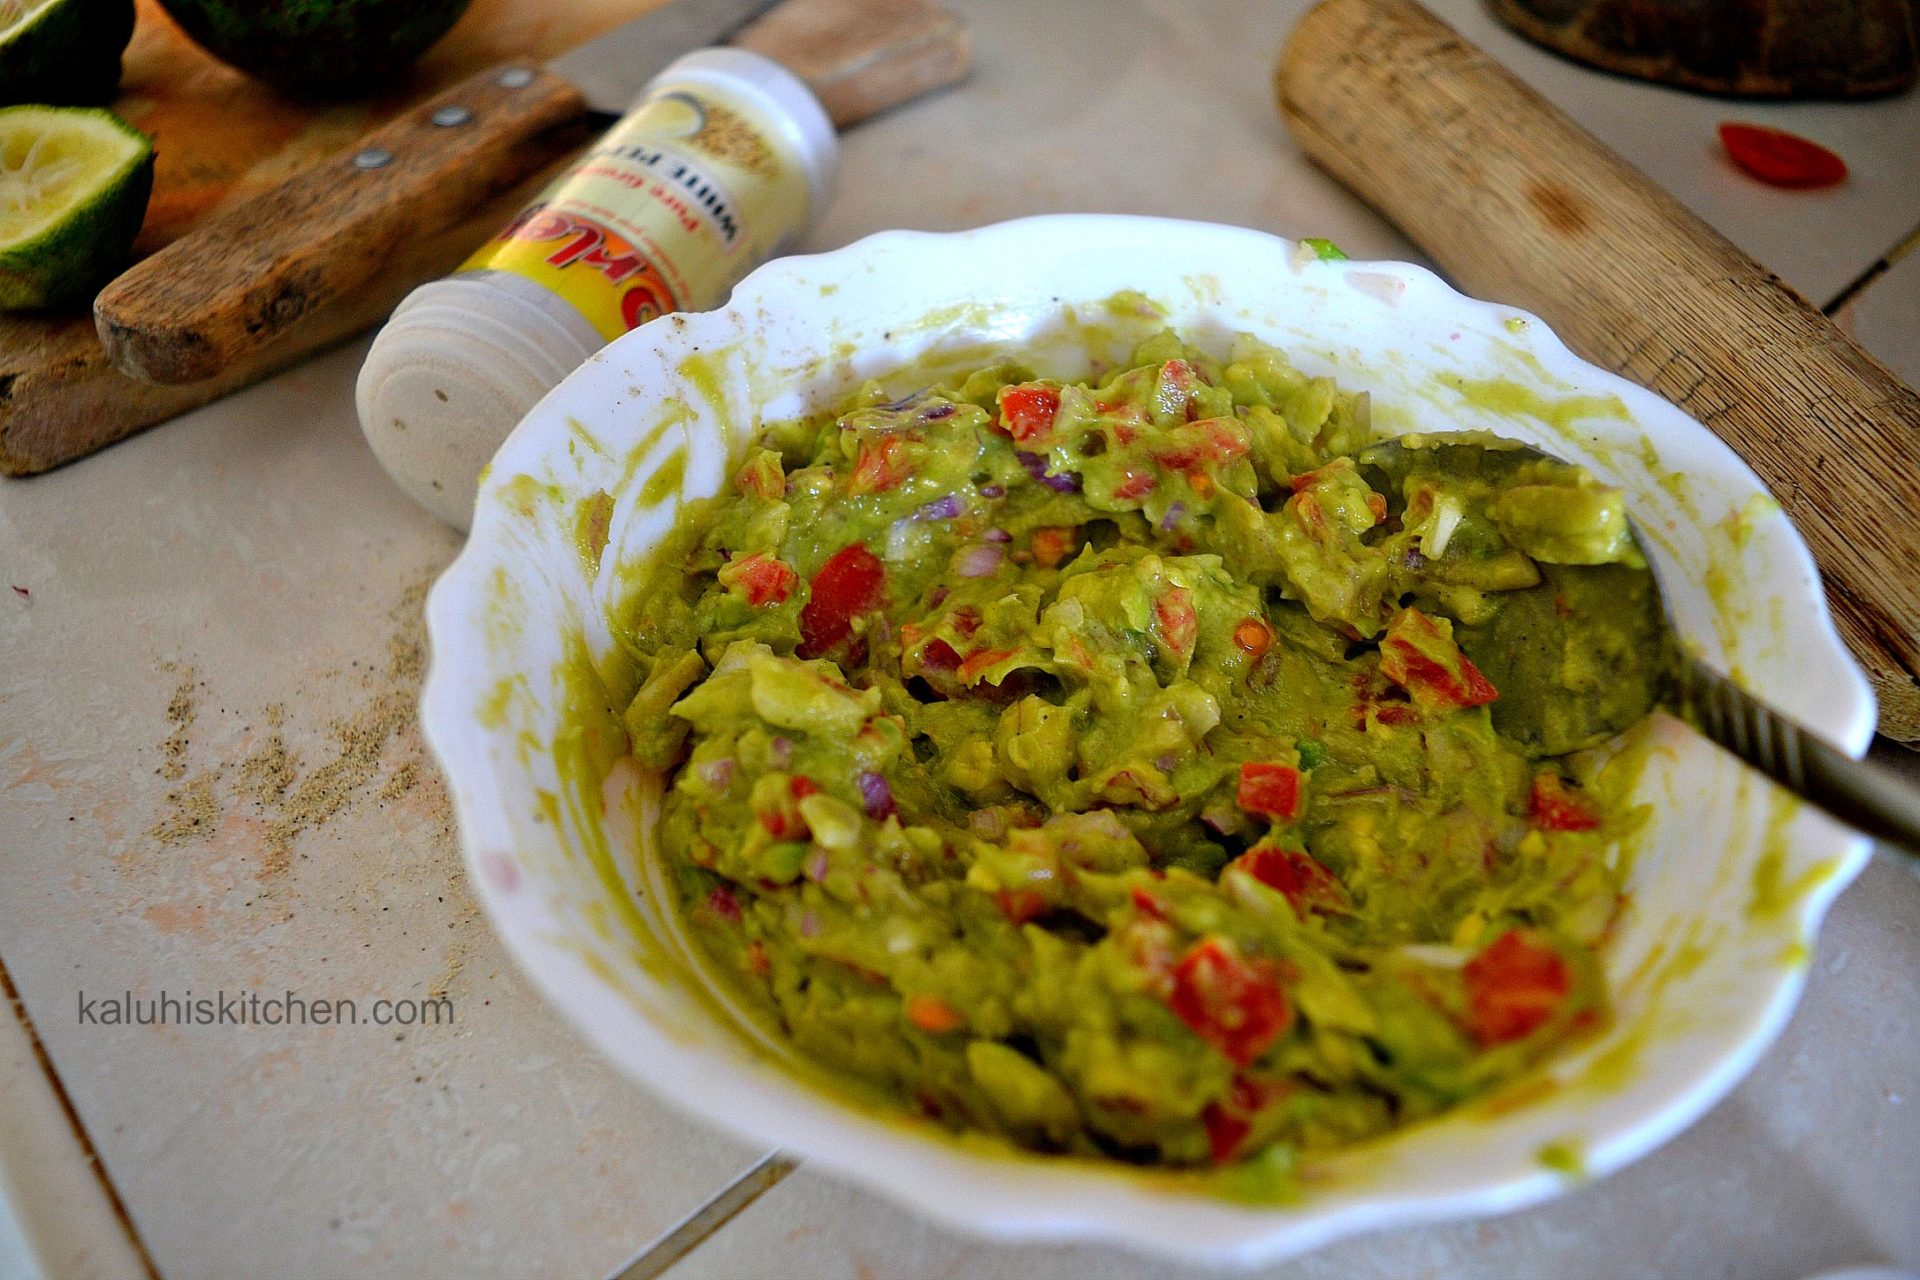 while mixing your guacamole, be careful not to overwork it. allow it to be chunky and heavy as opposed to light and fluid